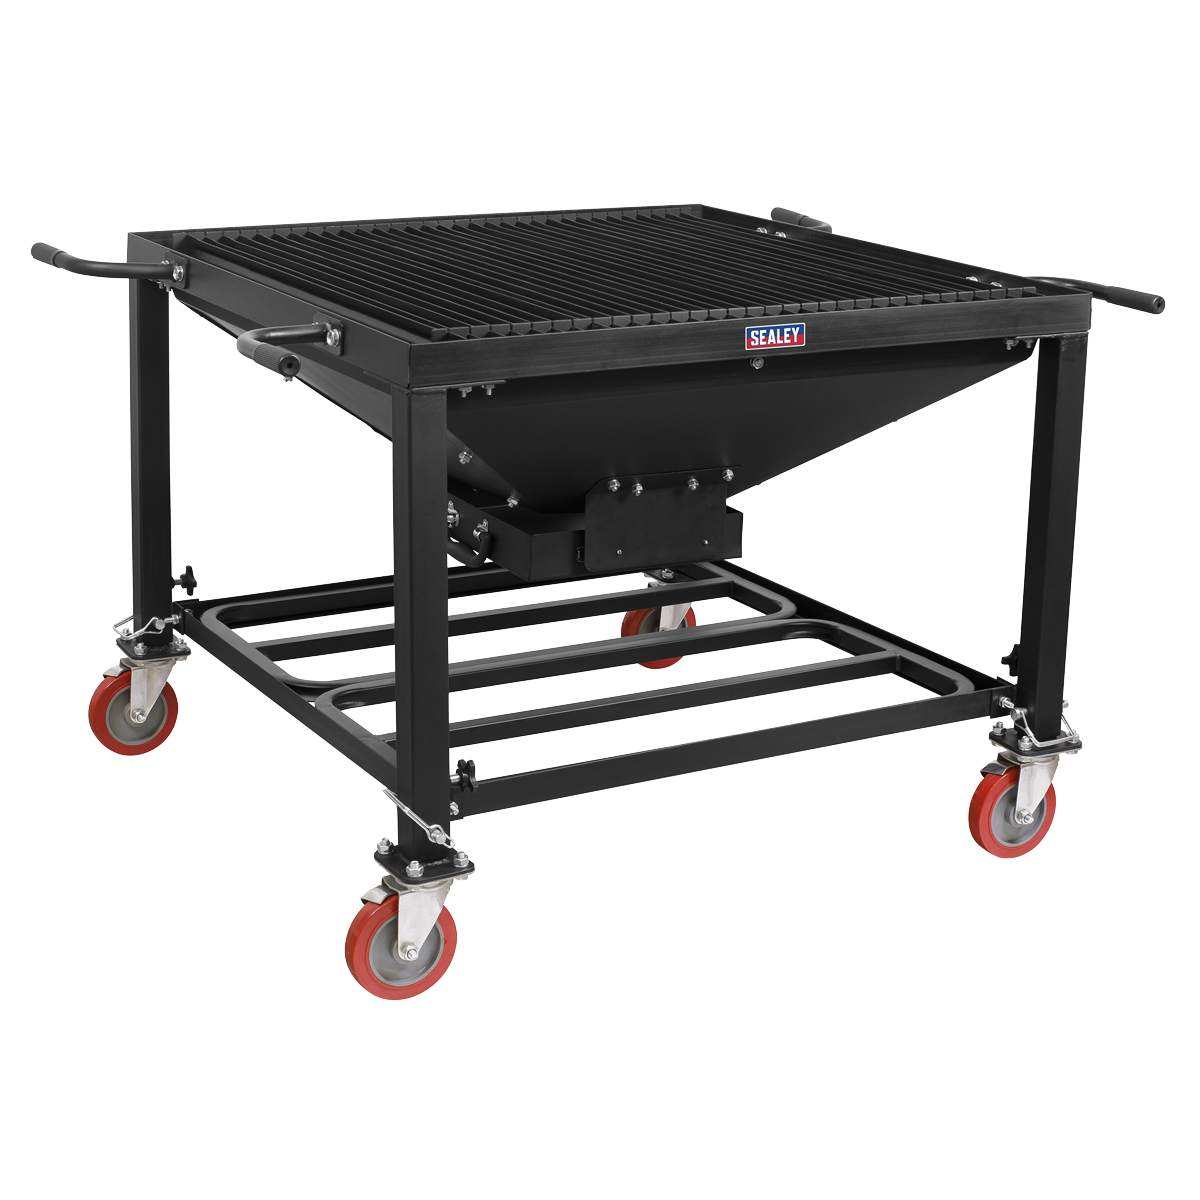 Sealey Plasma Cutting Table/Workbench - Adjustable Height with Castor Wheels